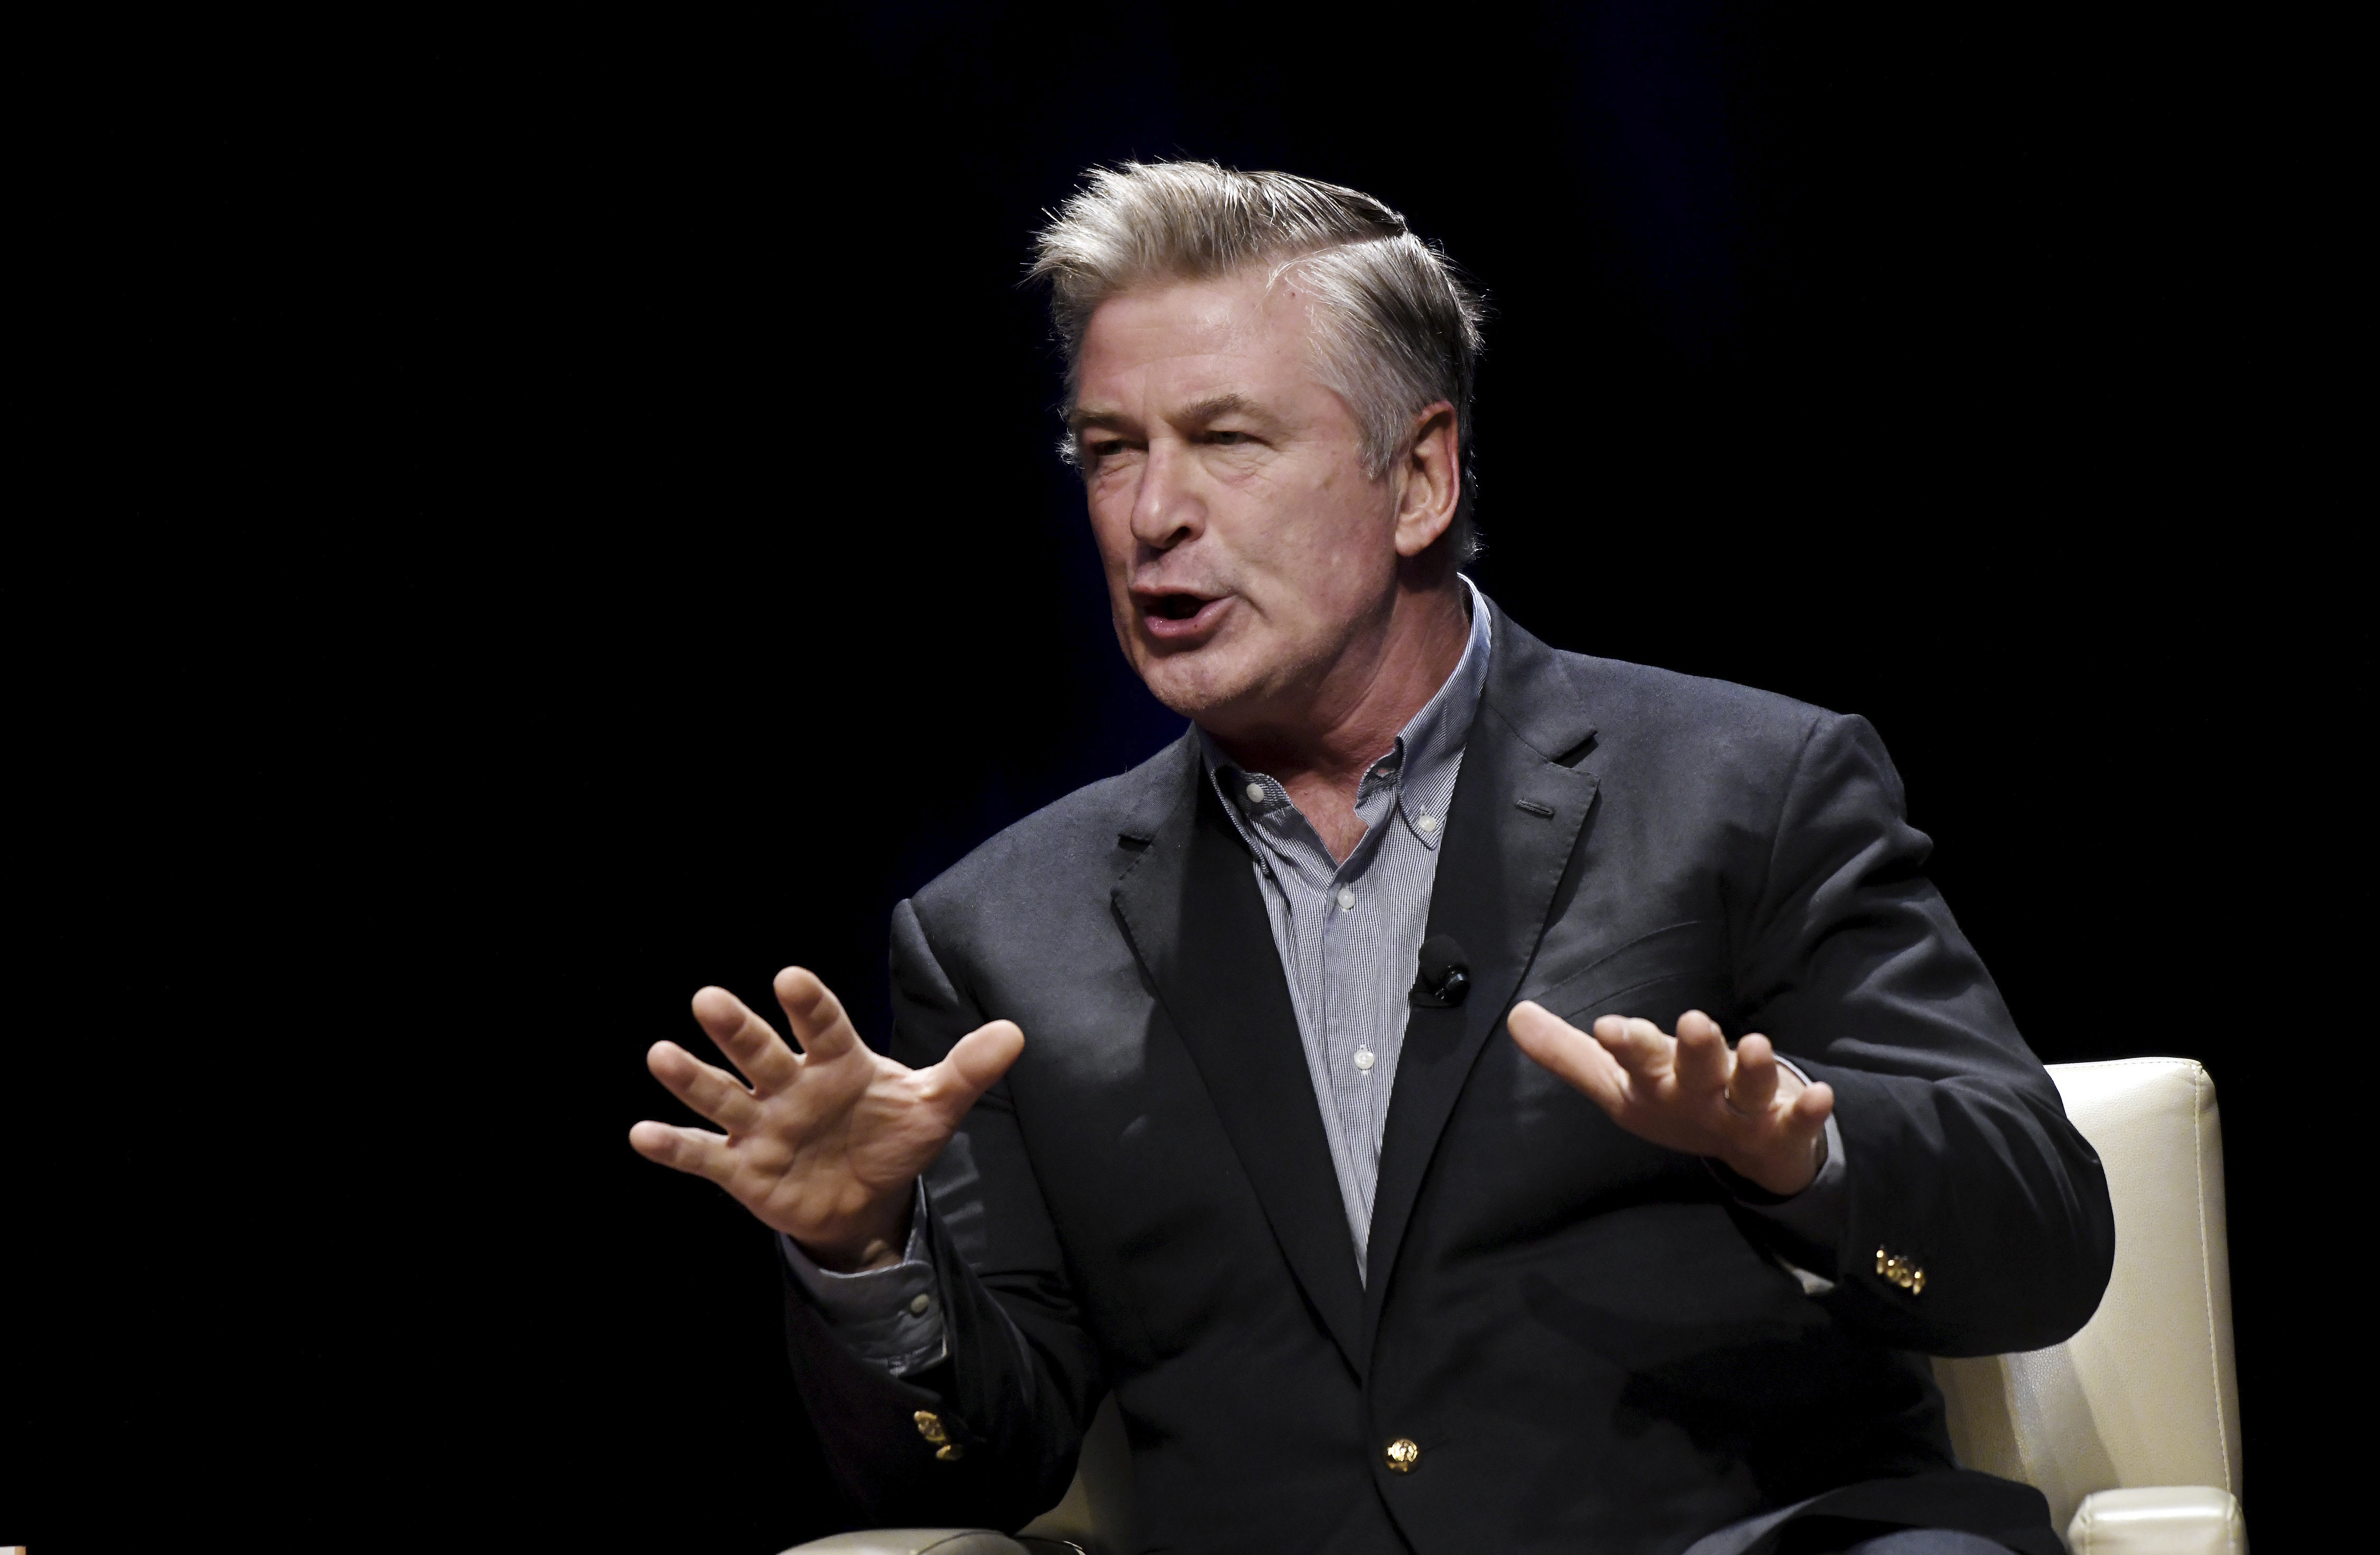 Alec Baldwin Eyes Broadway For Solo Trump Show, With Lorne Michaels' Blessing